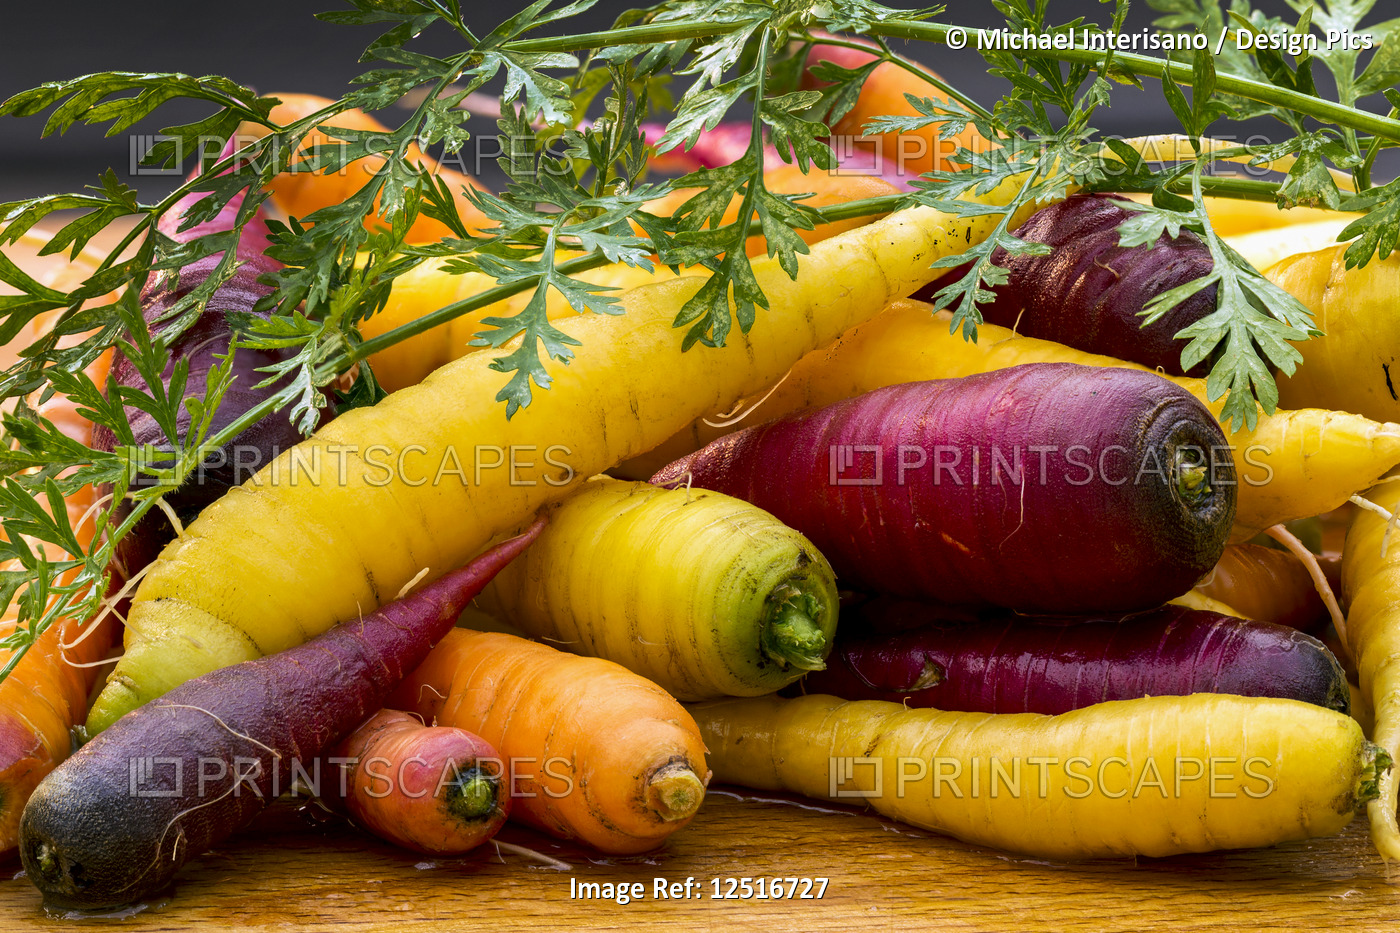 Variety of coloured fresh carrots laying on a wooden surface